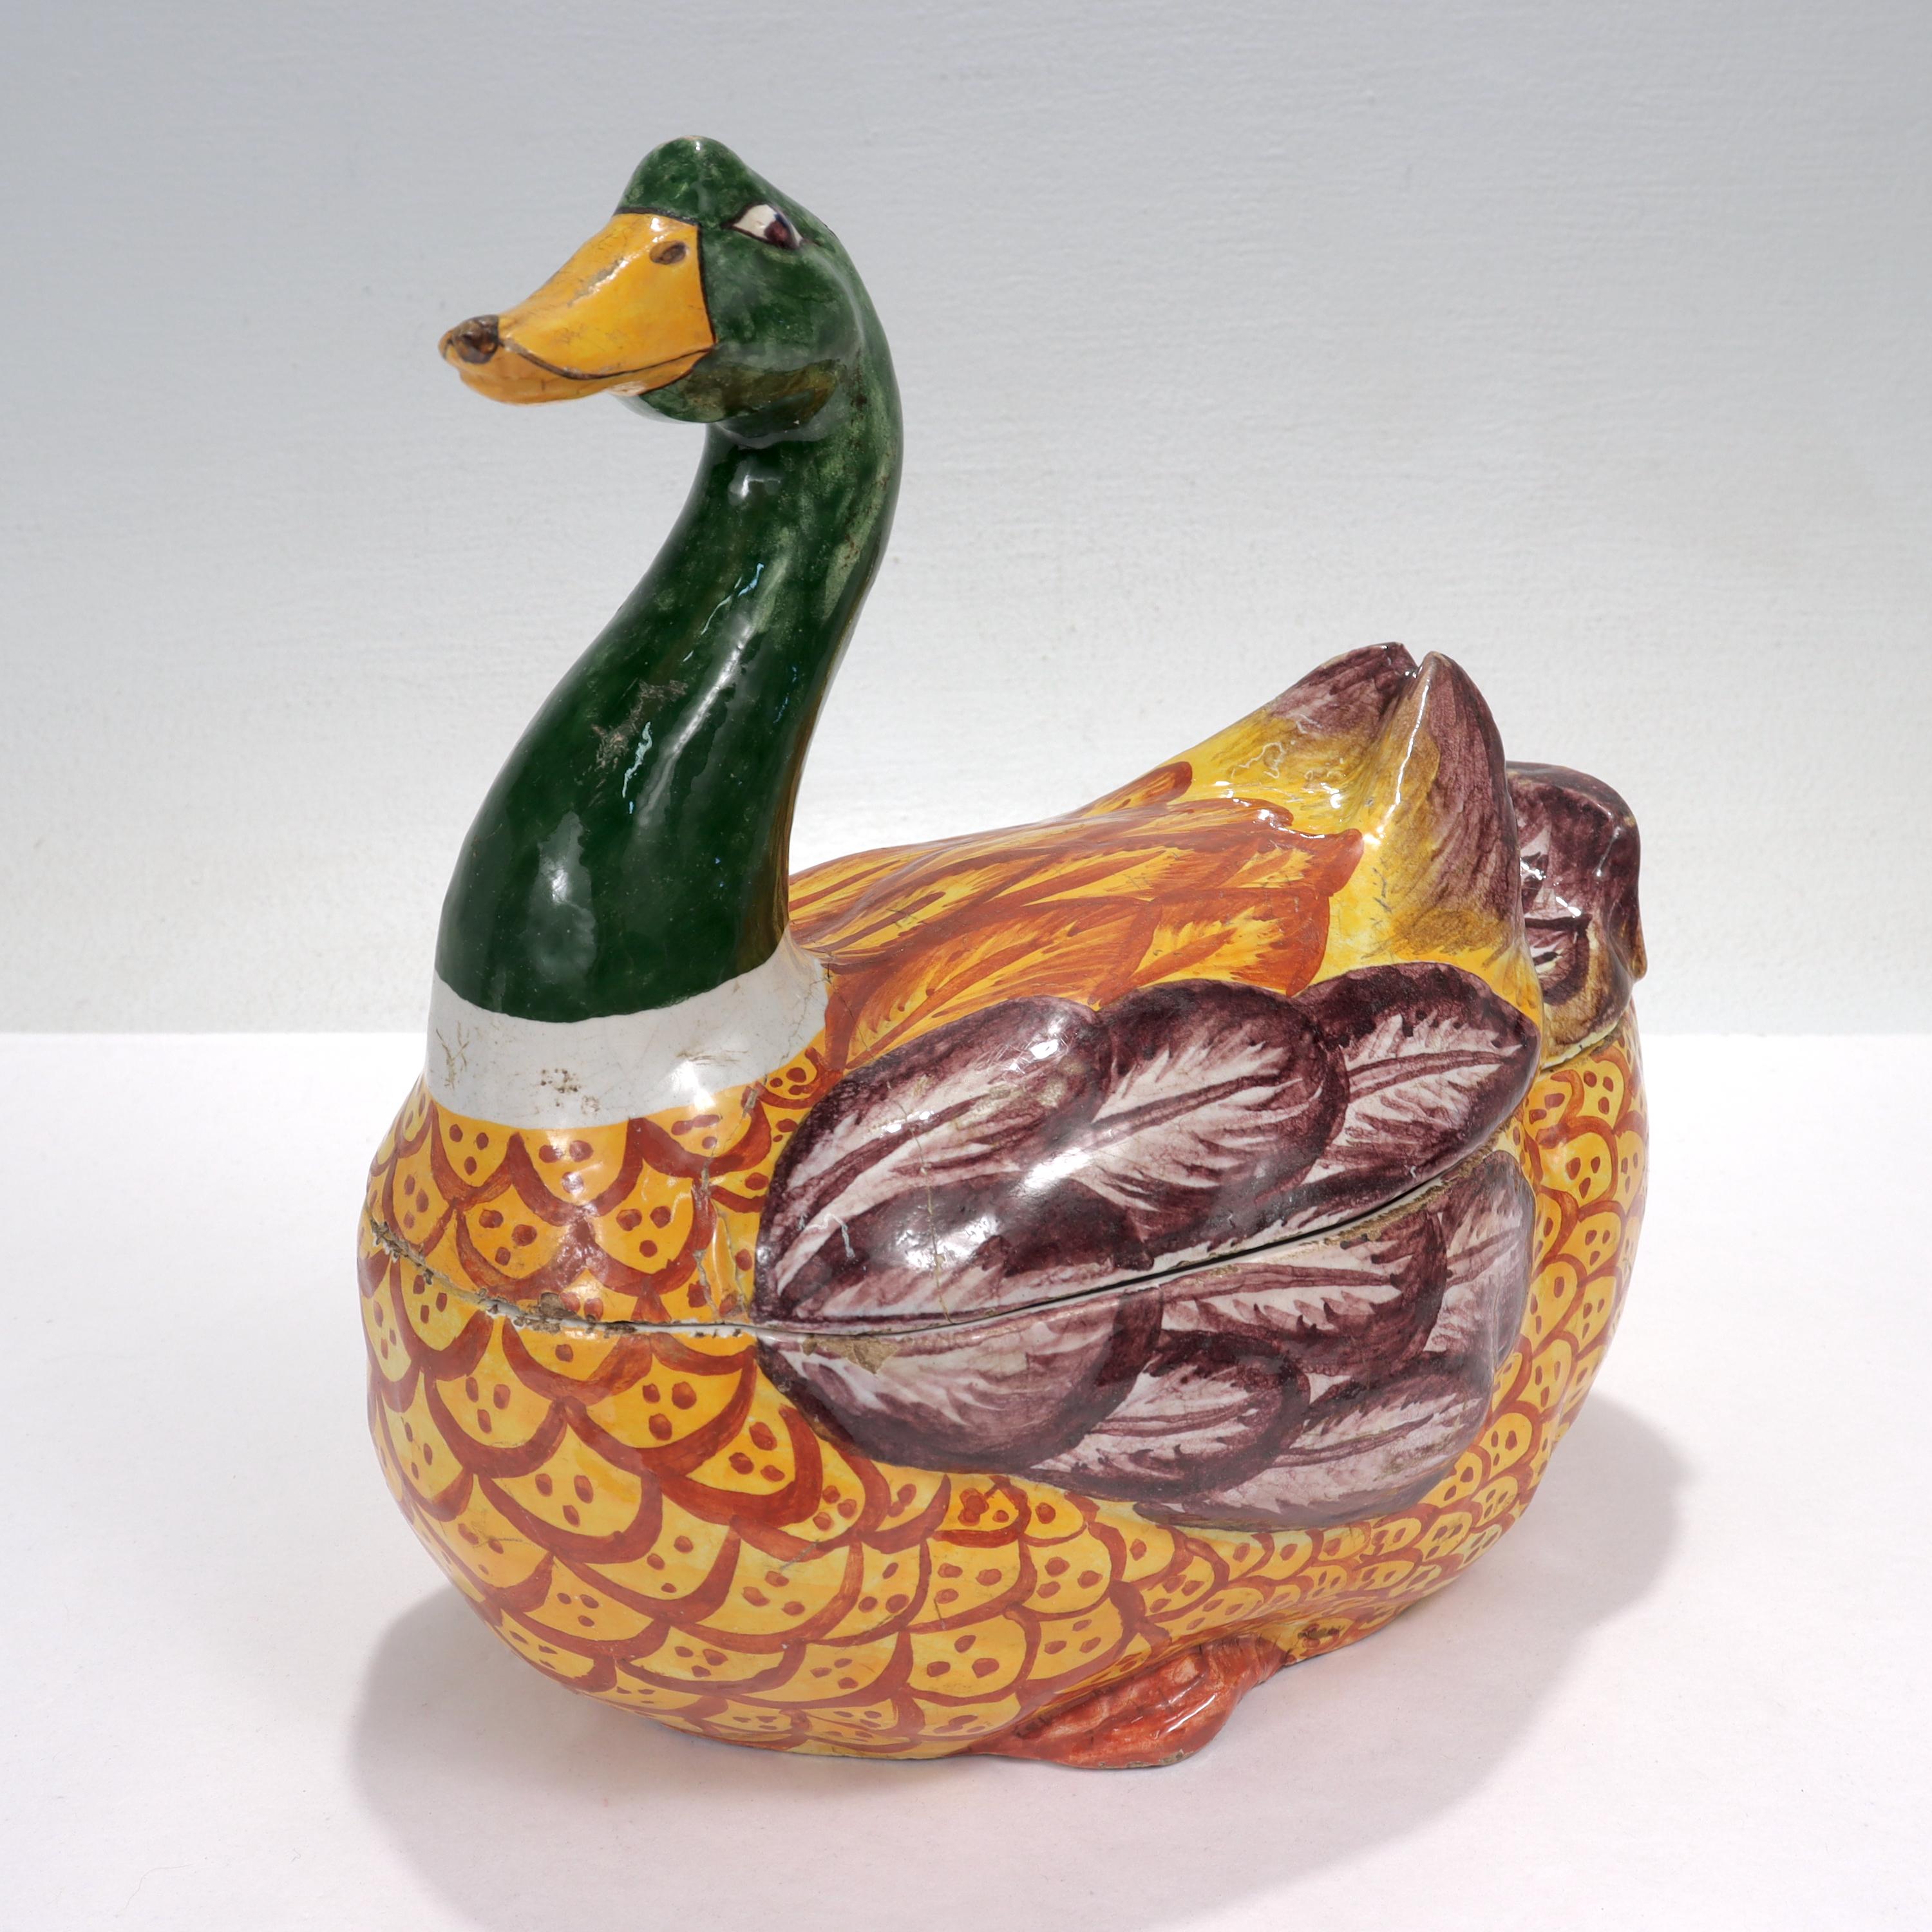 A fine antique Delft figural tureen or box.

In the form of a polychrome female duck with rich red, yellow, and purple plumage. 

The top half of the duck is a removable lid.

Marked with a blue 'KF' maker's mark to the base.

Simply a great piece